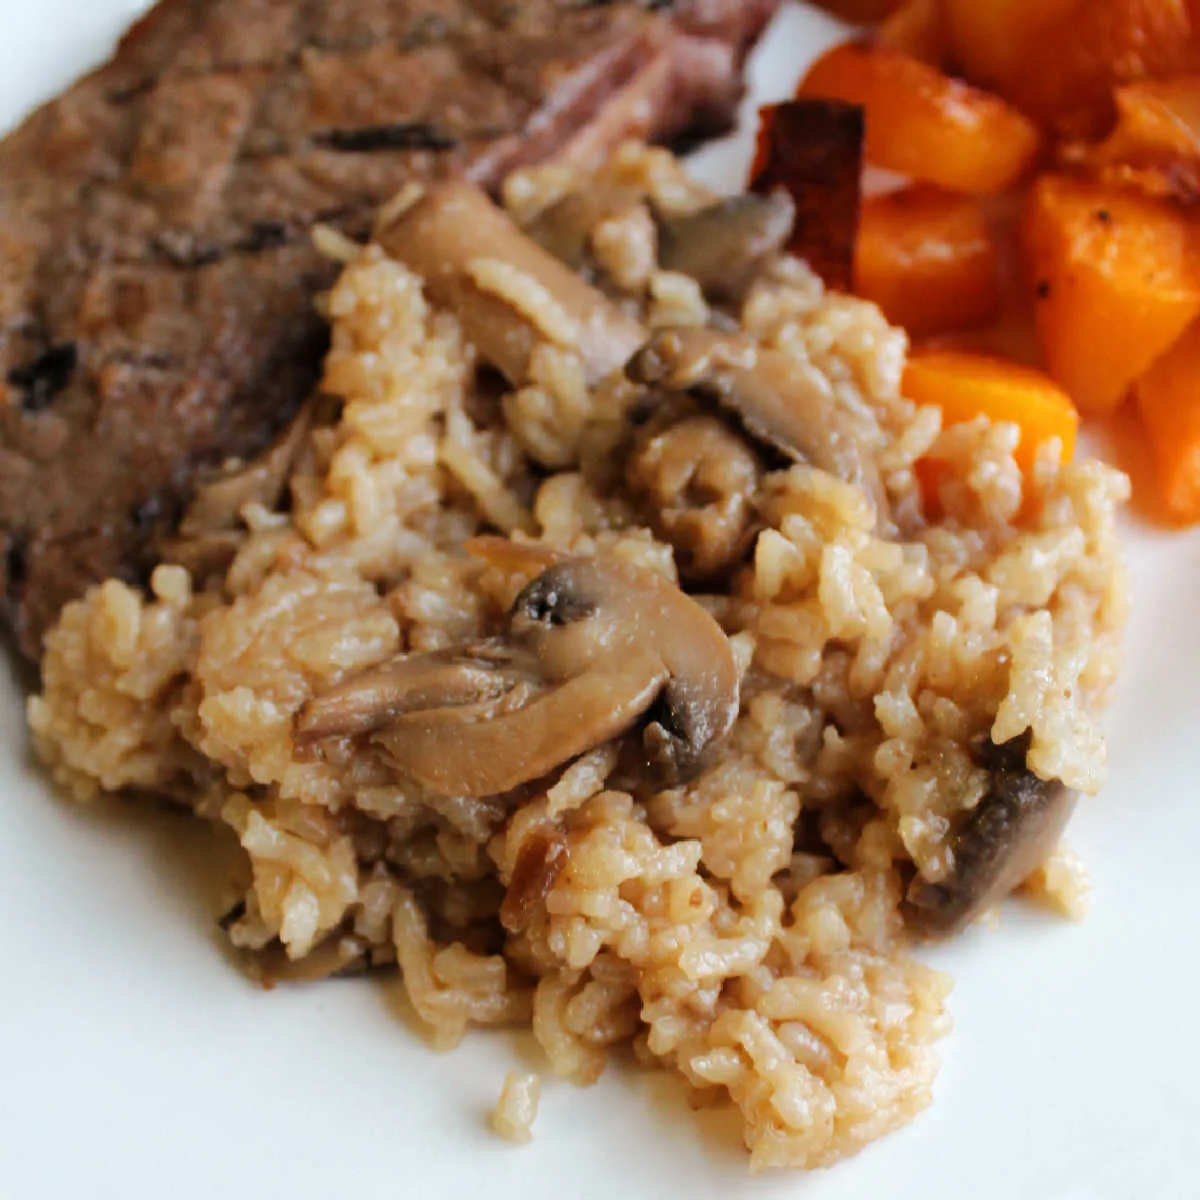 Close up of fluffy baked rice with beef broth and mushrooms served on dinner plate.